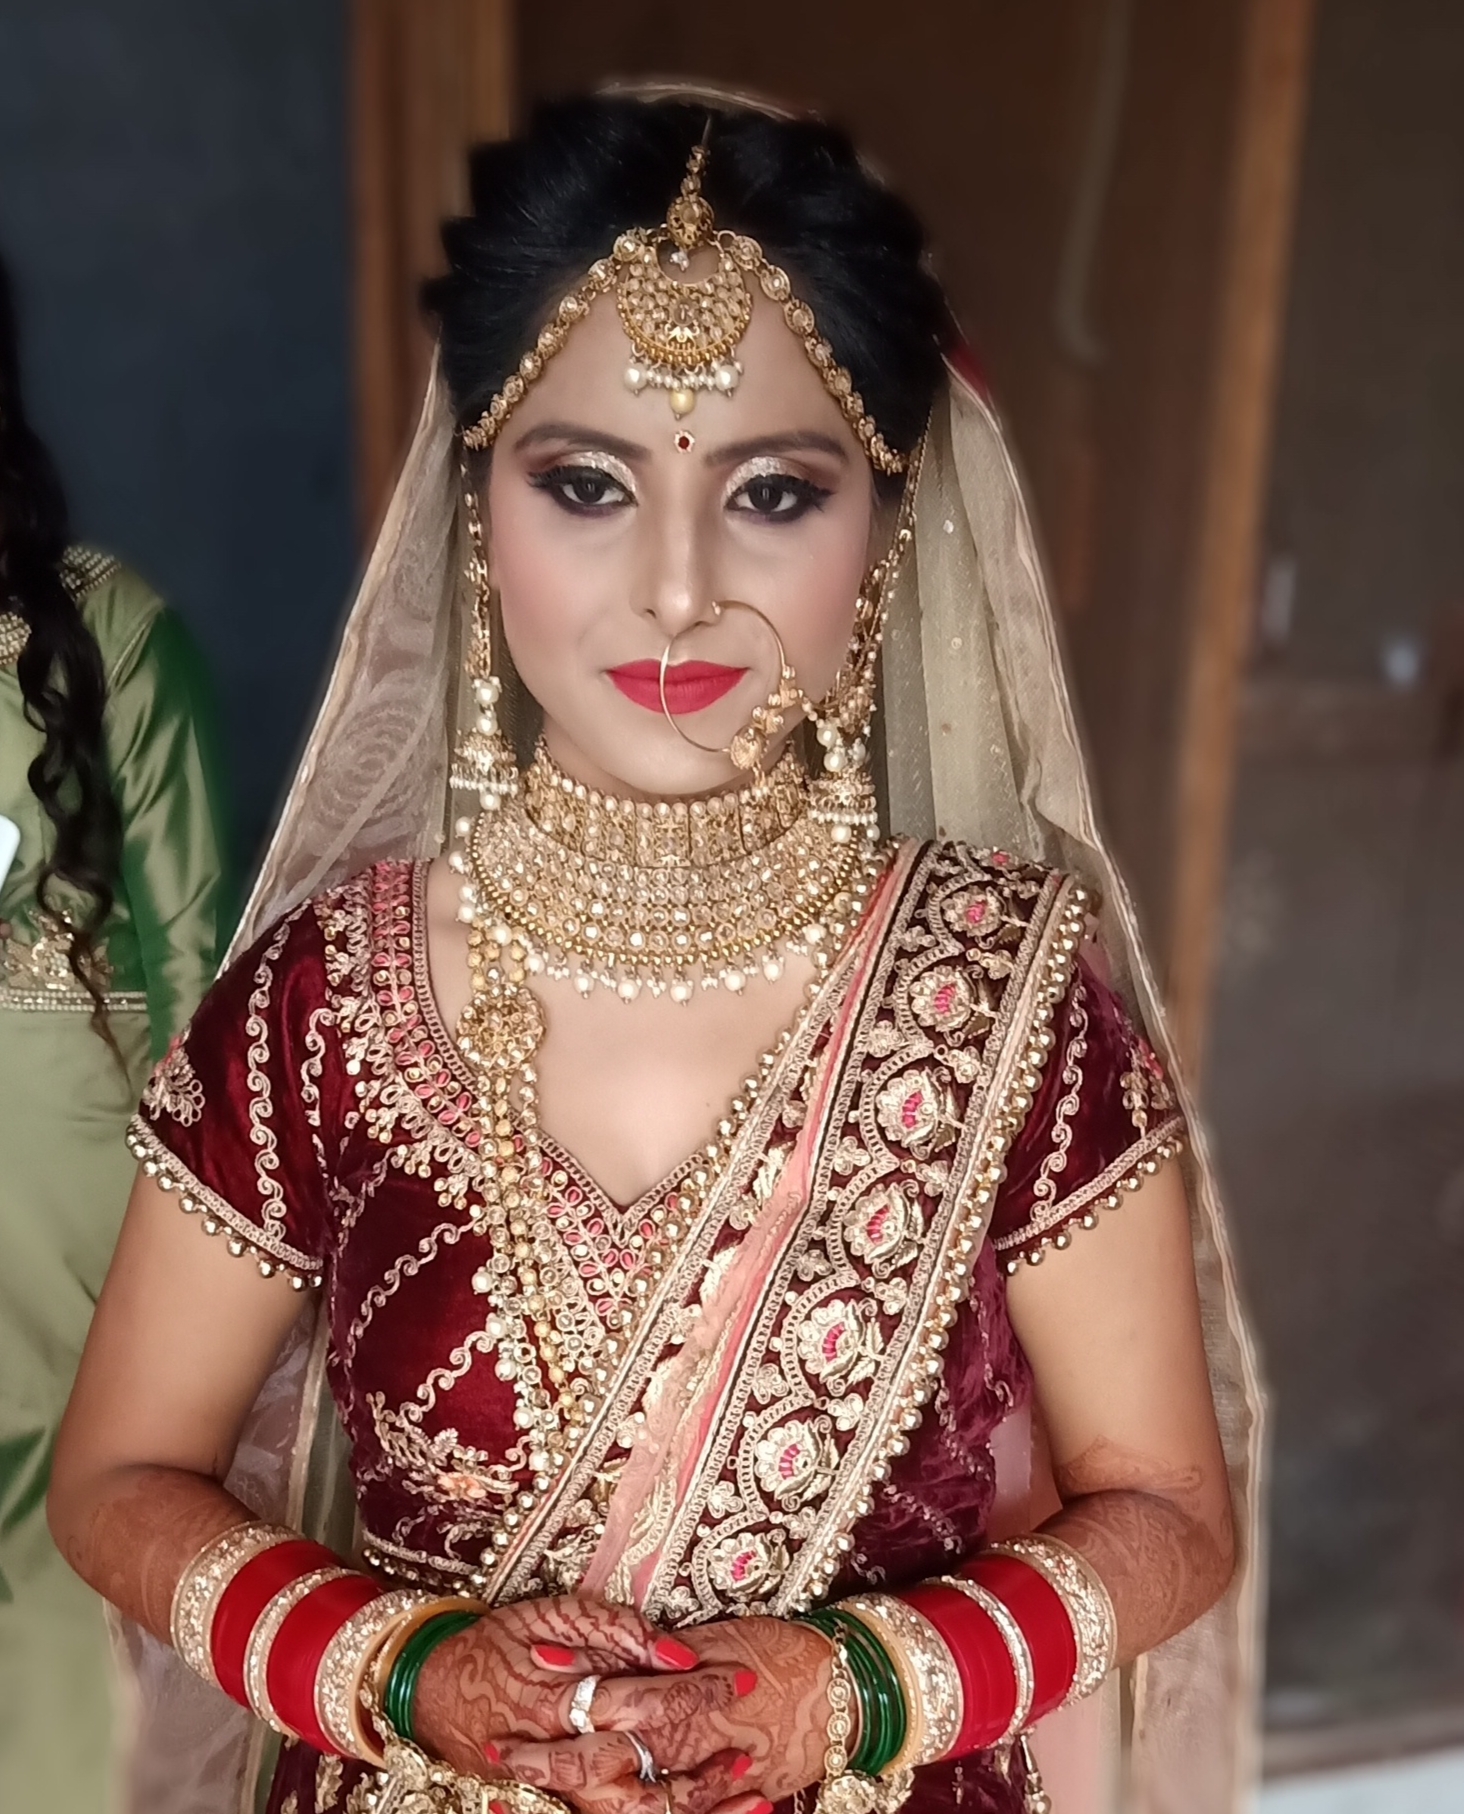 Aarti Koli Makeup Artist Services, Review and Info - Olready